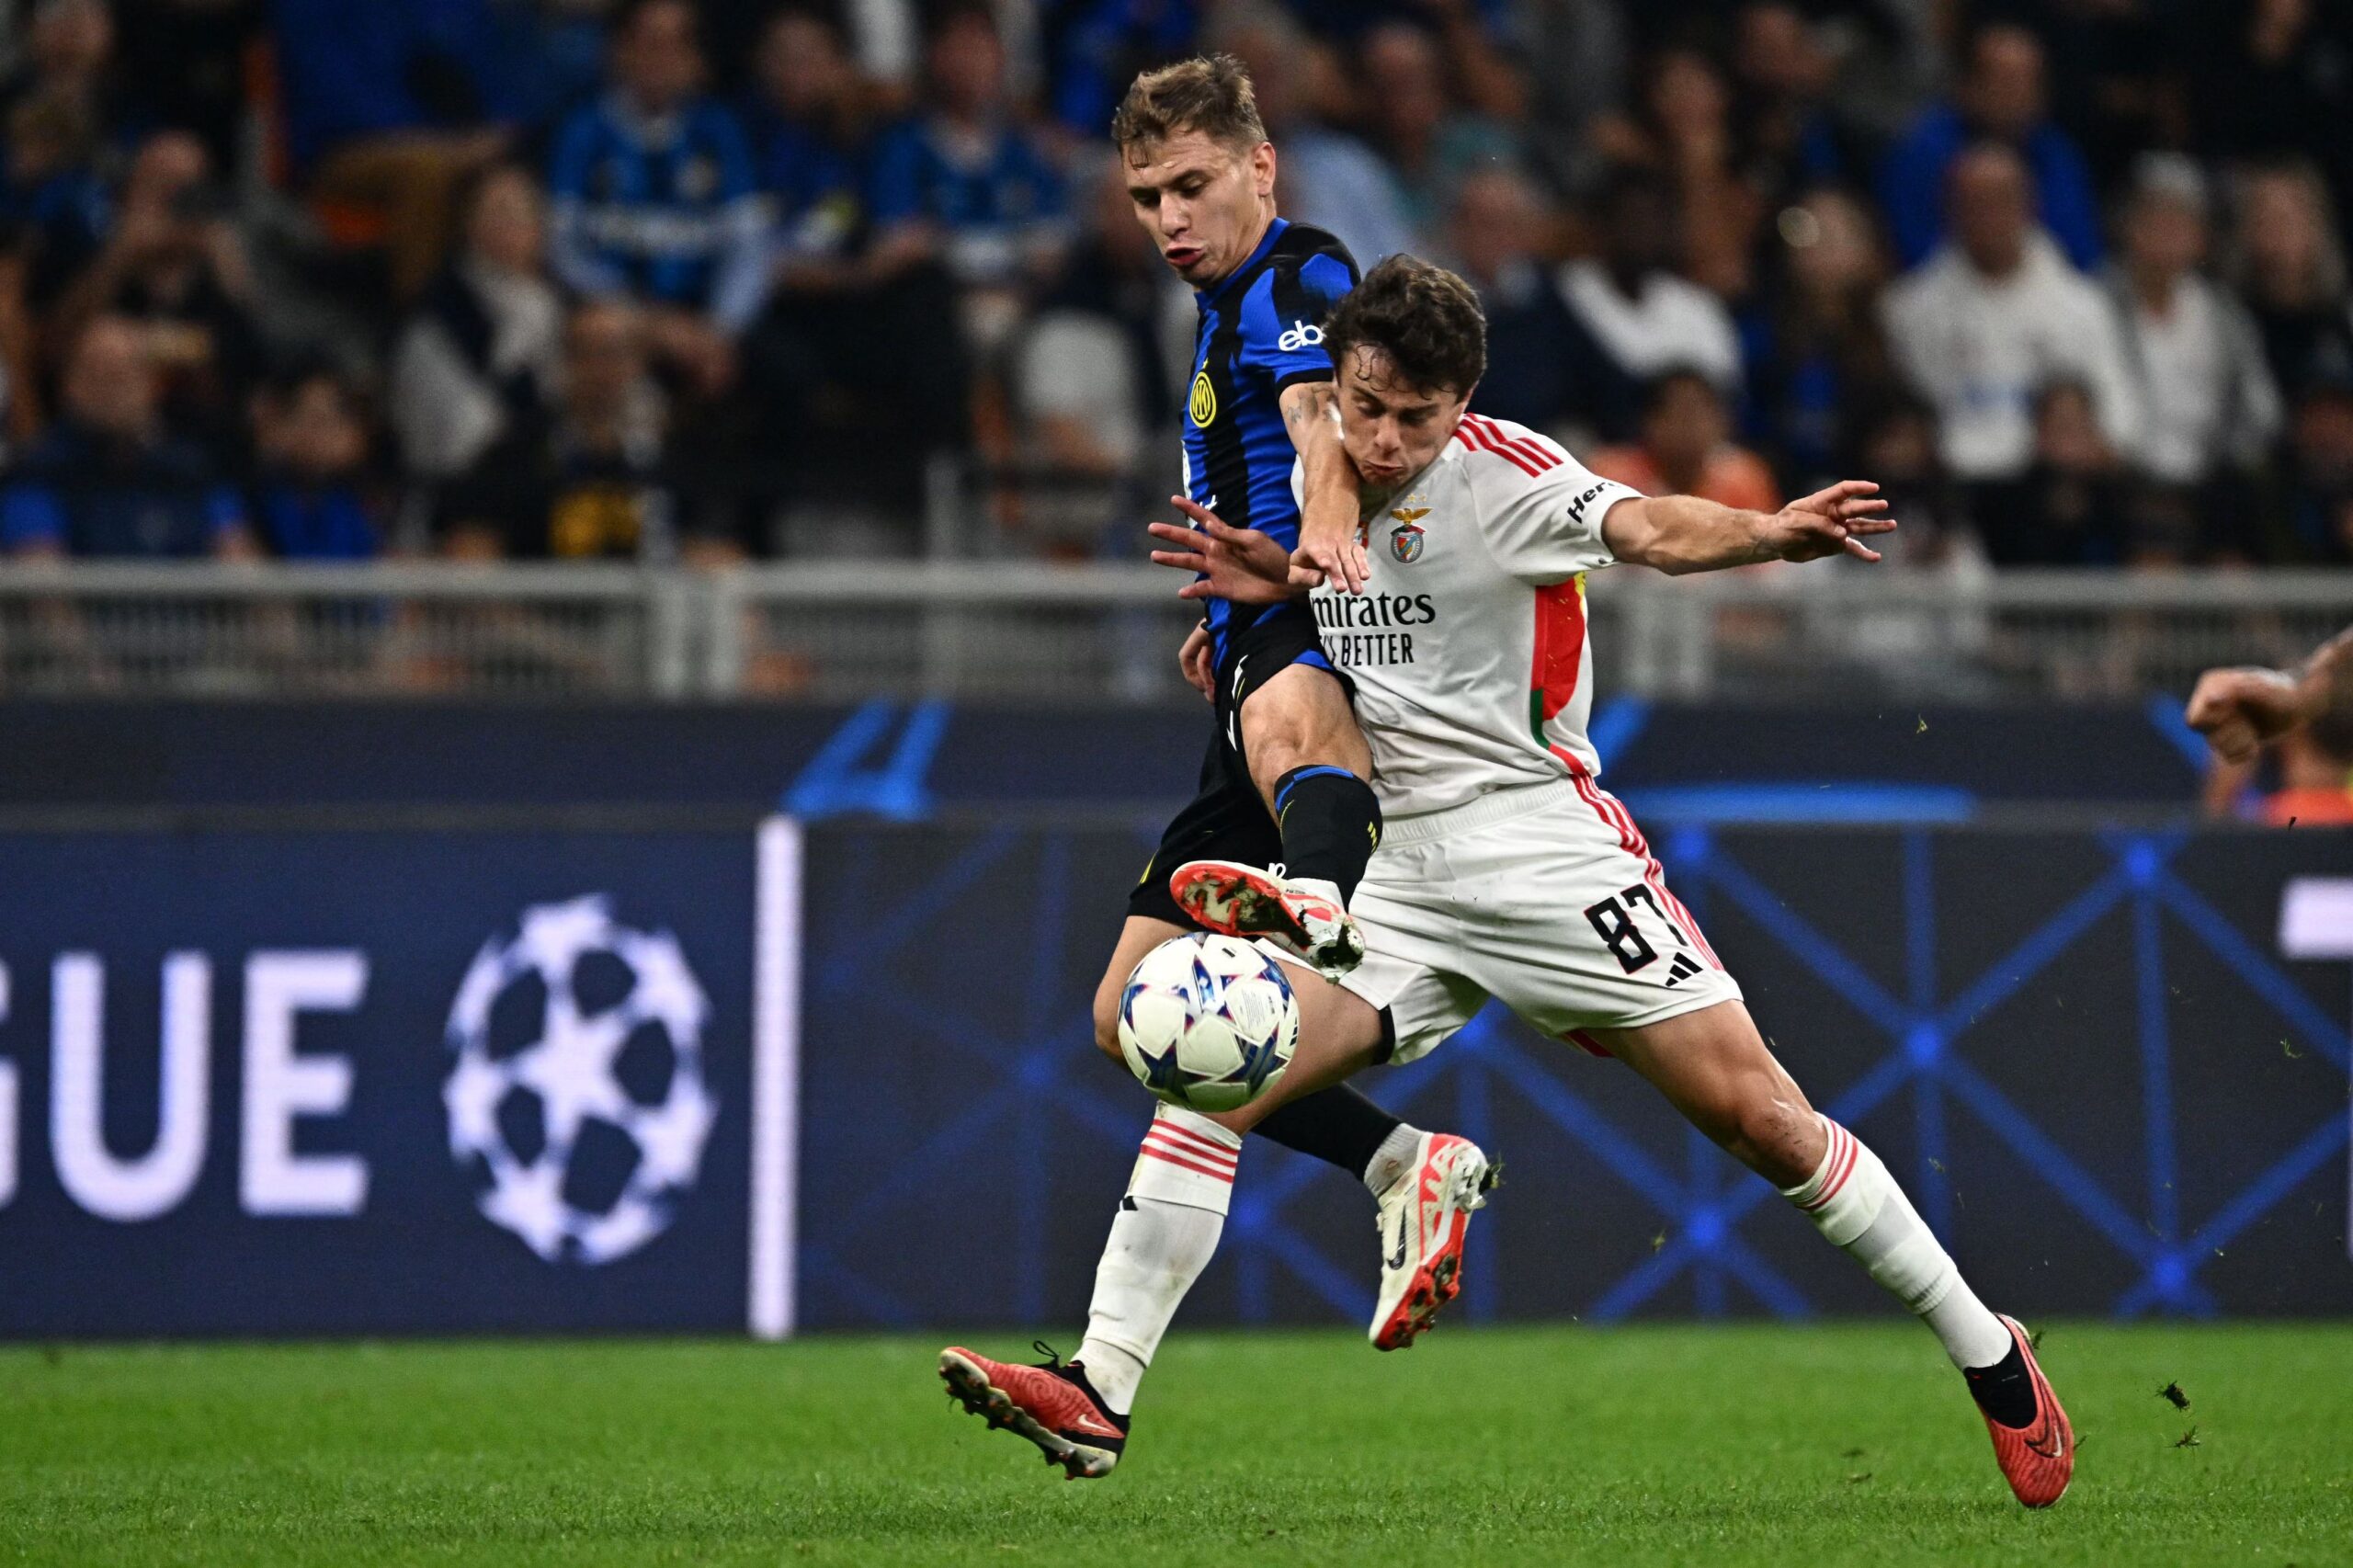 Inter Milan's Italian midfielder #23 Nicolo Barella (L) fights for the ball with Benfica's Portuguese midfielder #87 Joao Neves during the UEFA Champions League 1st round day 2 Group D football match Inter Milan vs Benfica at the San Siro stadium in Milan on October 3, 2023. (Photo by GABRIEL BOUYS / AFP) (Photo by GABRIEL BOUYS/AFP via Getty Images)